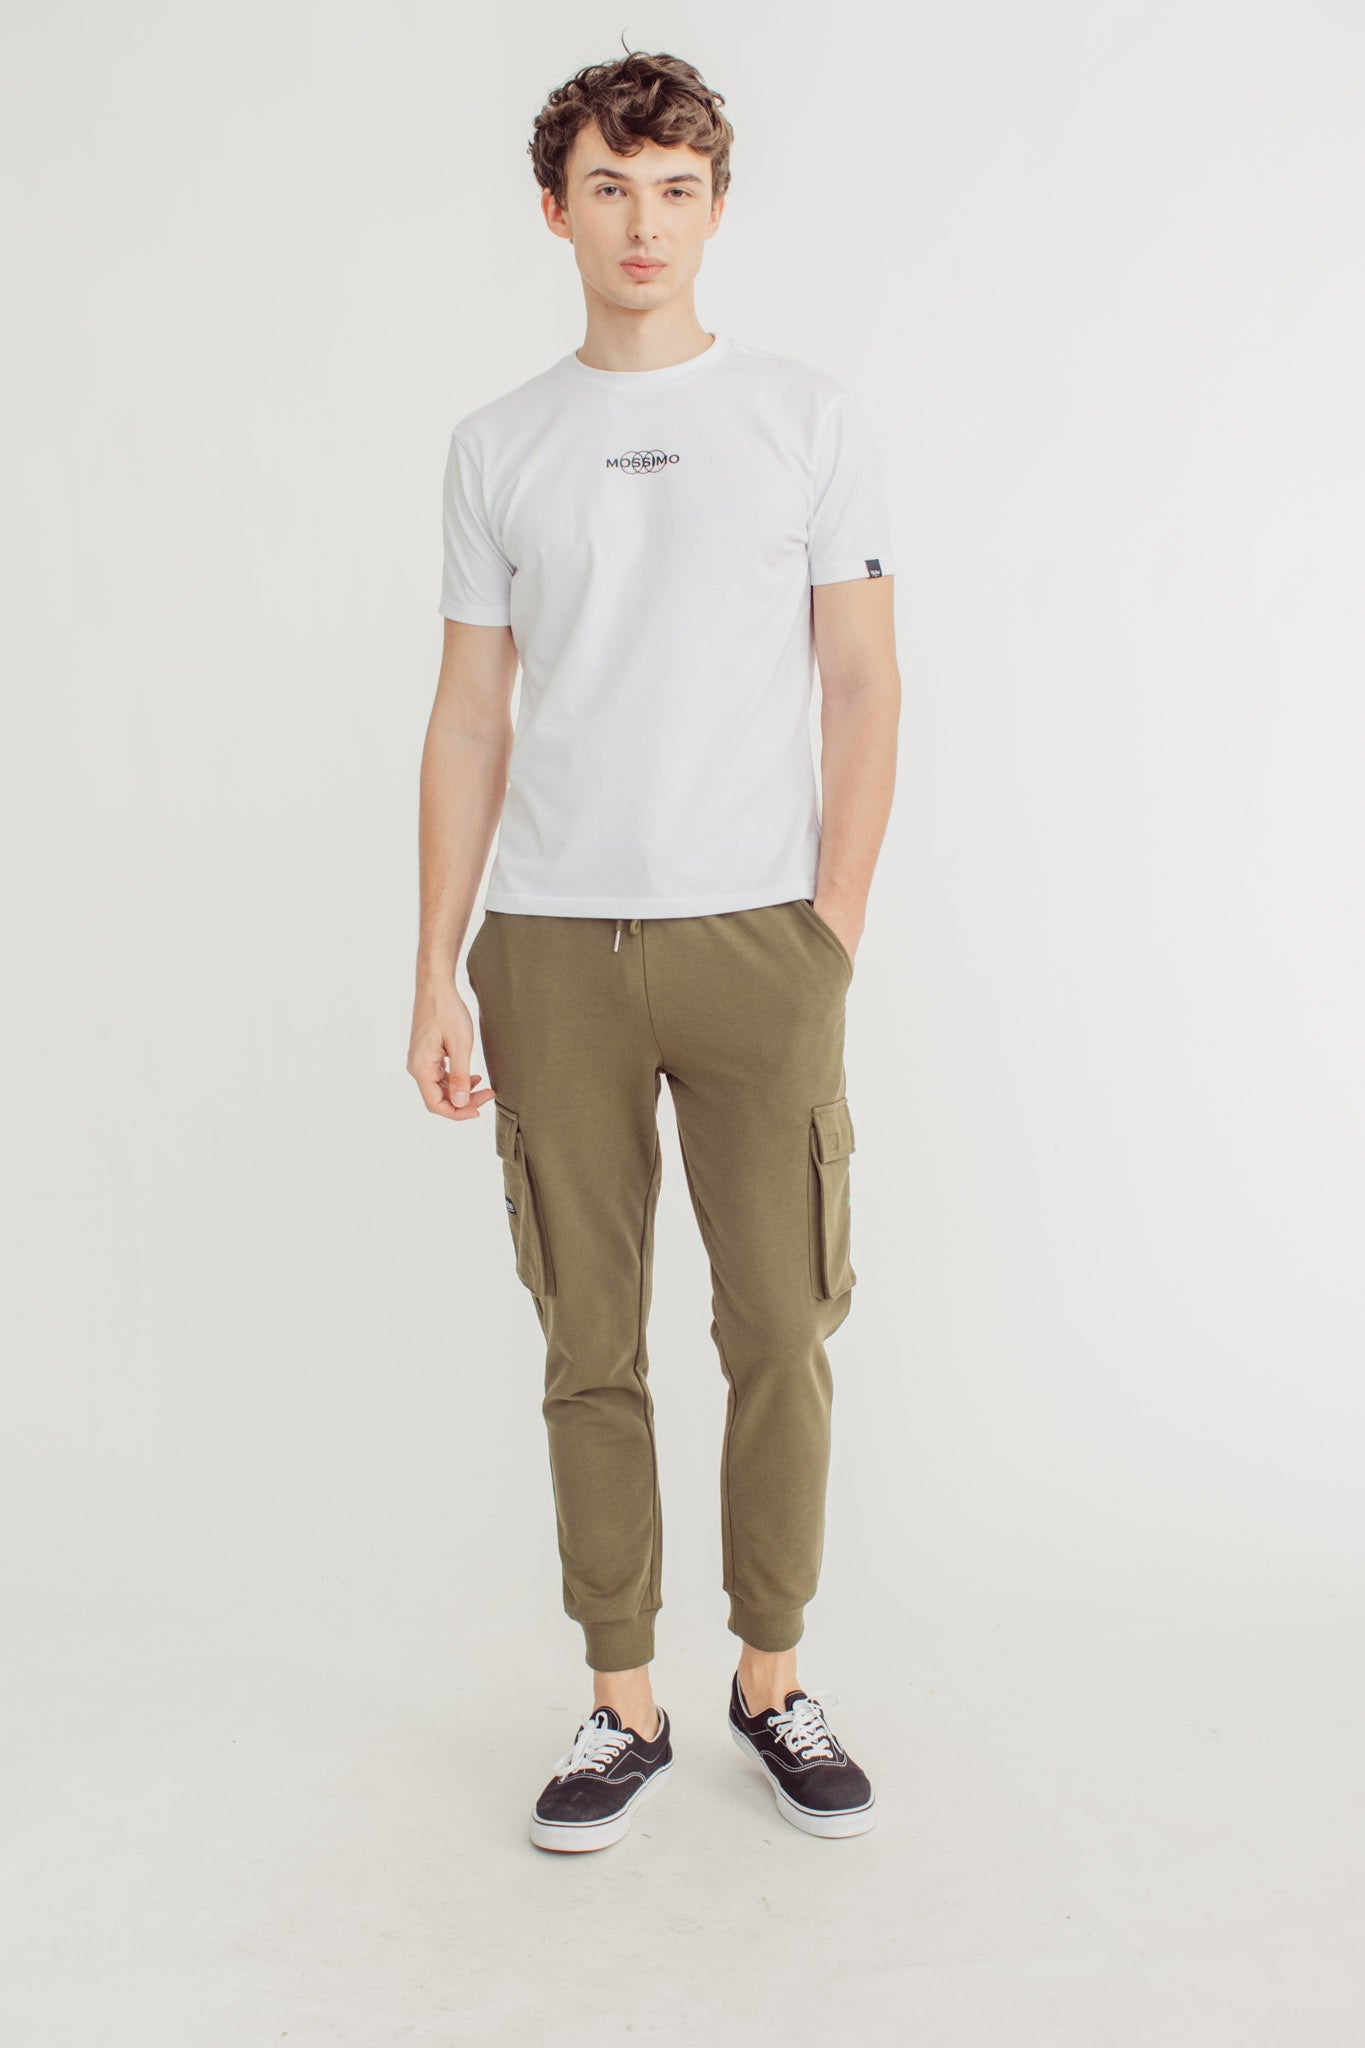 Olive Cargo Pocket pants with Design - Mossimo PH